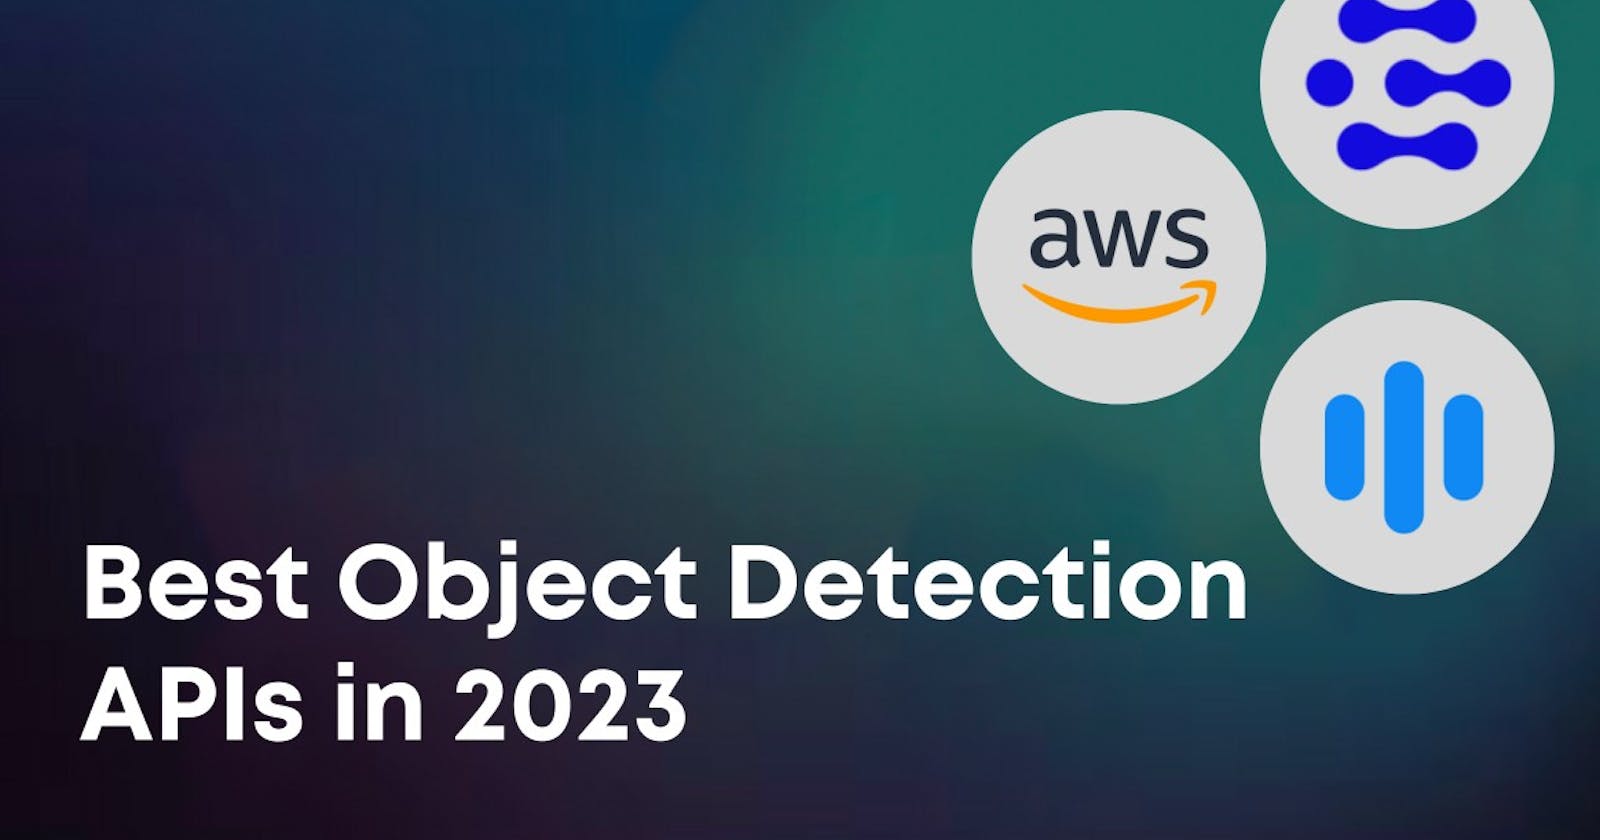 Best Object Detection APIs in 2023